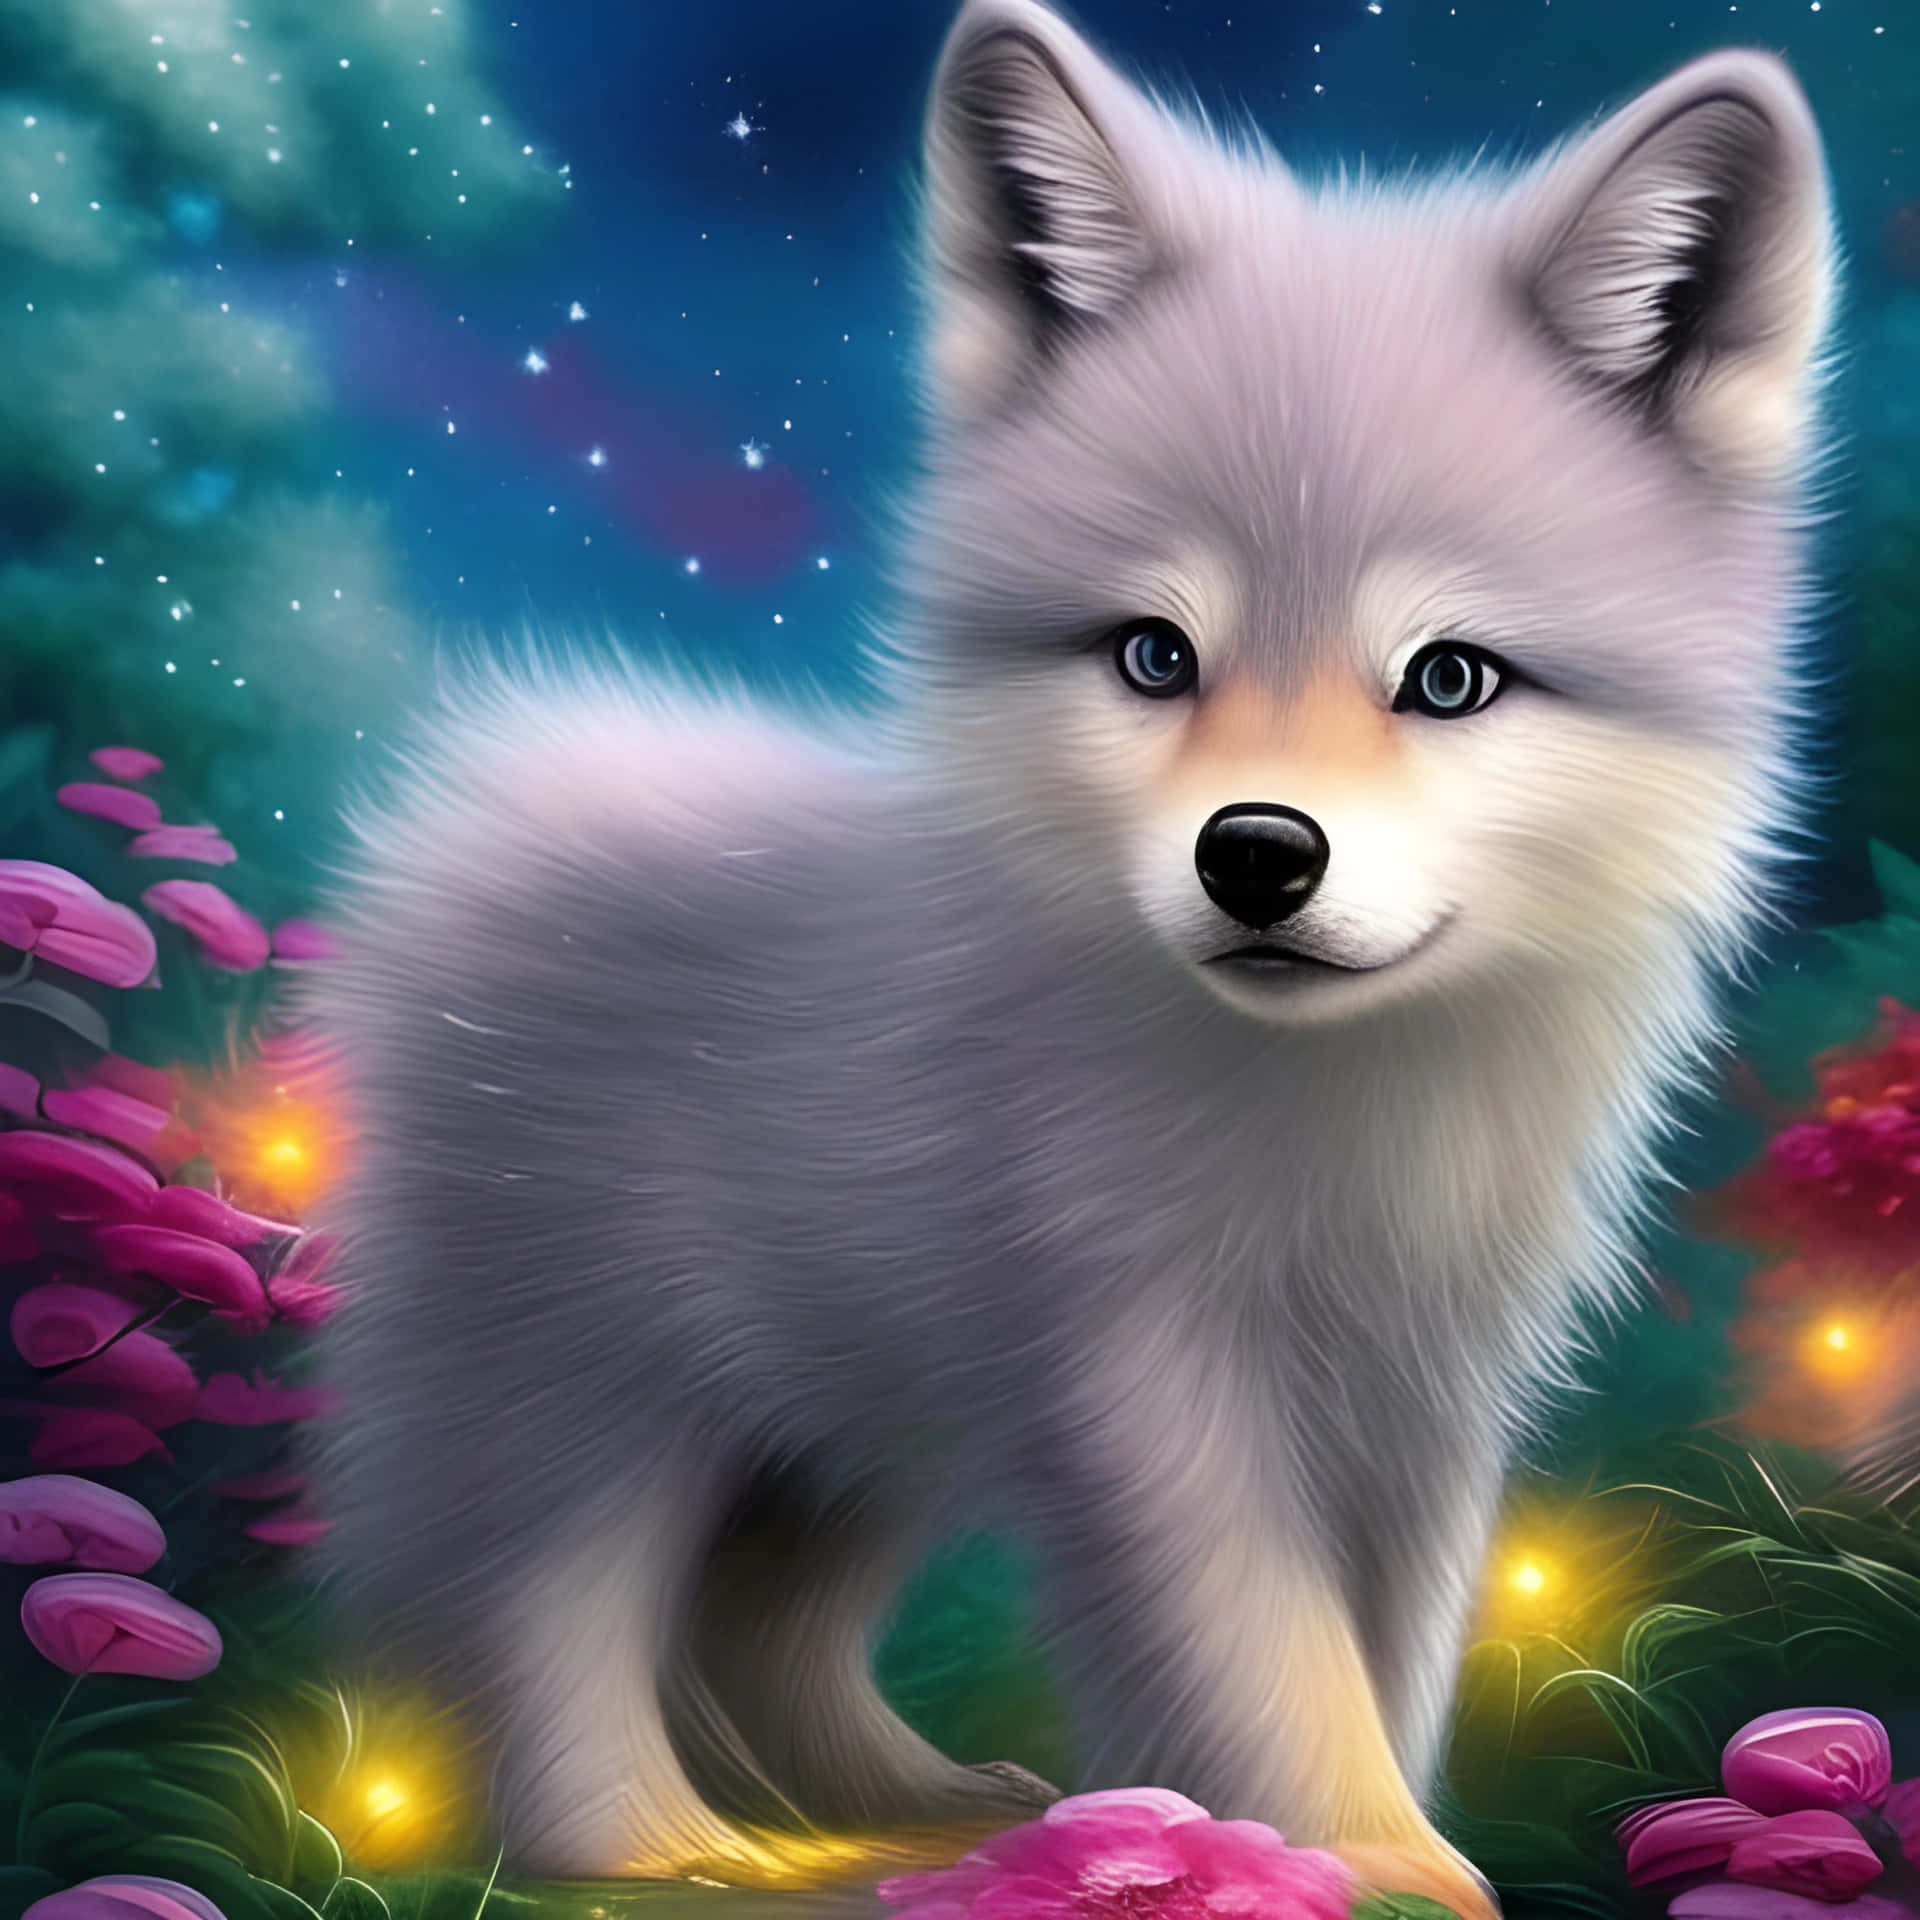 Cute Wolf Background Images HD Pictures and Wallpaper For Free Download   Pngtree